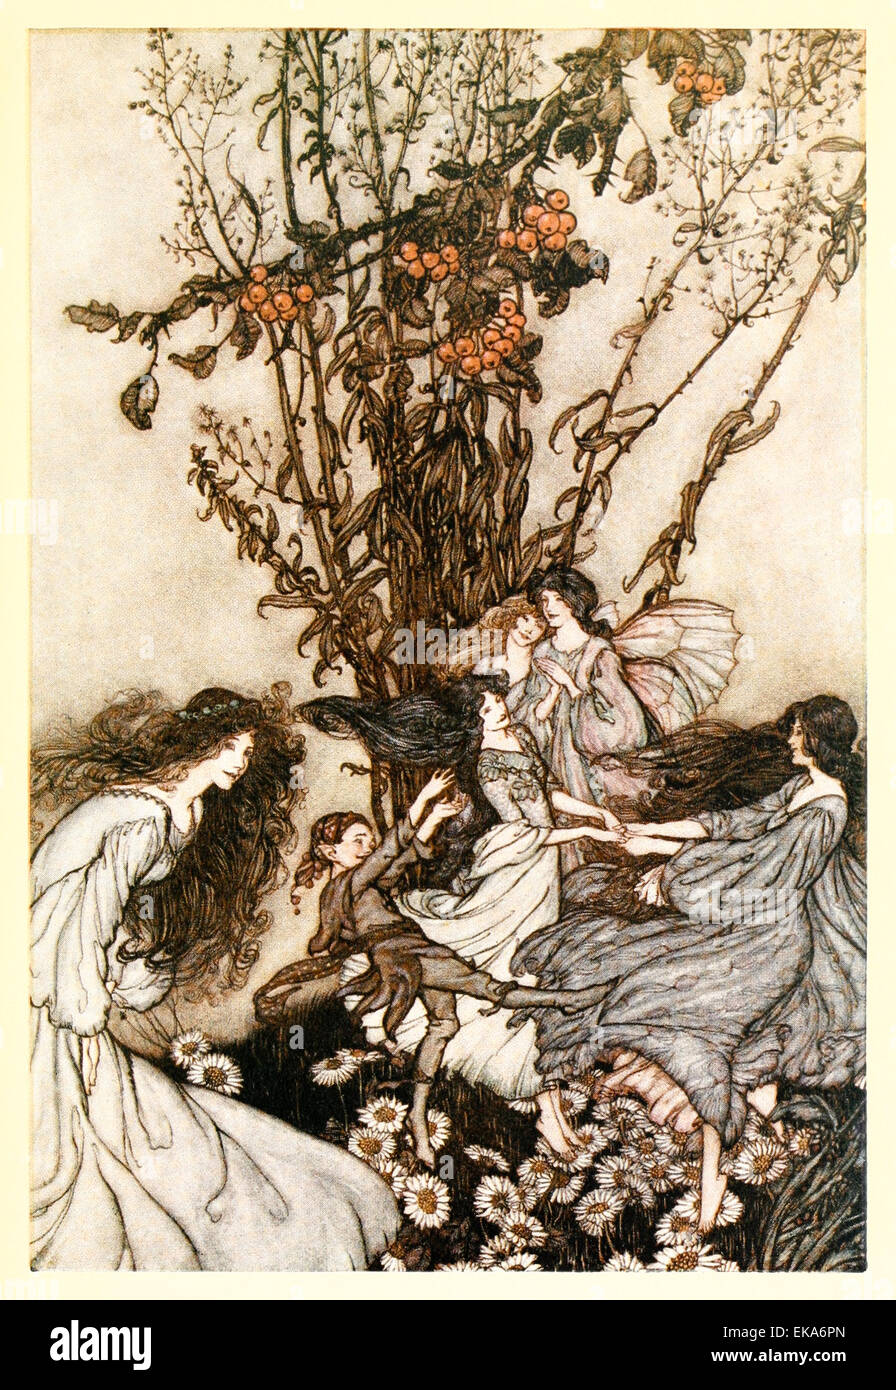 Fairies never say, 'We feel happy'; what they say is 'We feel dancey' - Illustration by Arthur Rackham (1867-1939) from ‘Peter Pan in Kensington Gardens' by J.M. Barrie (1860-1937). See description Stock Photo